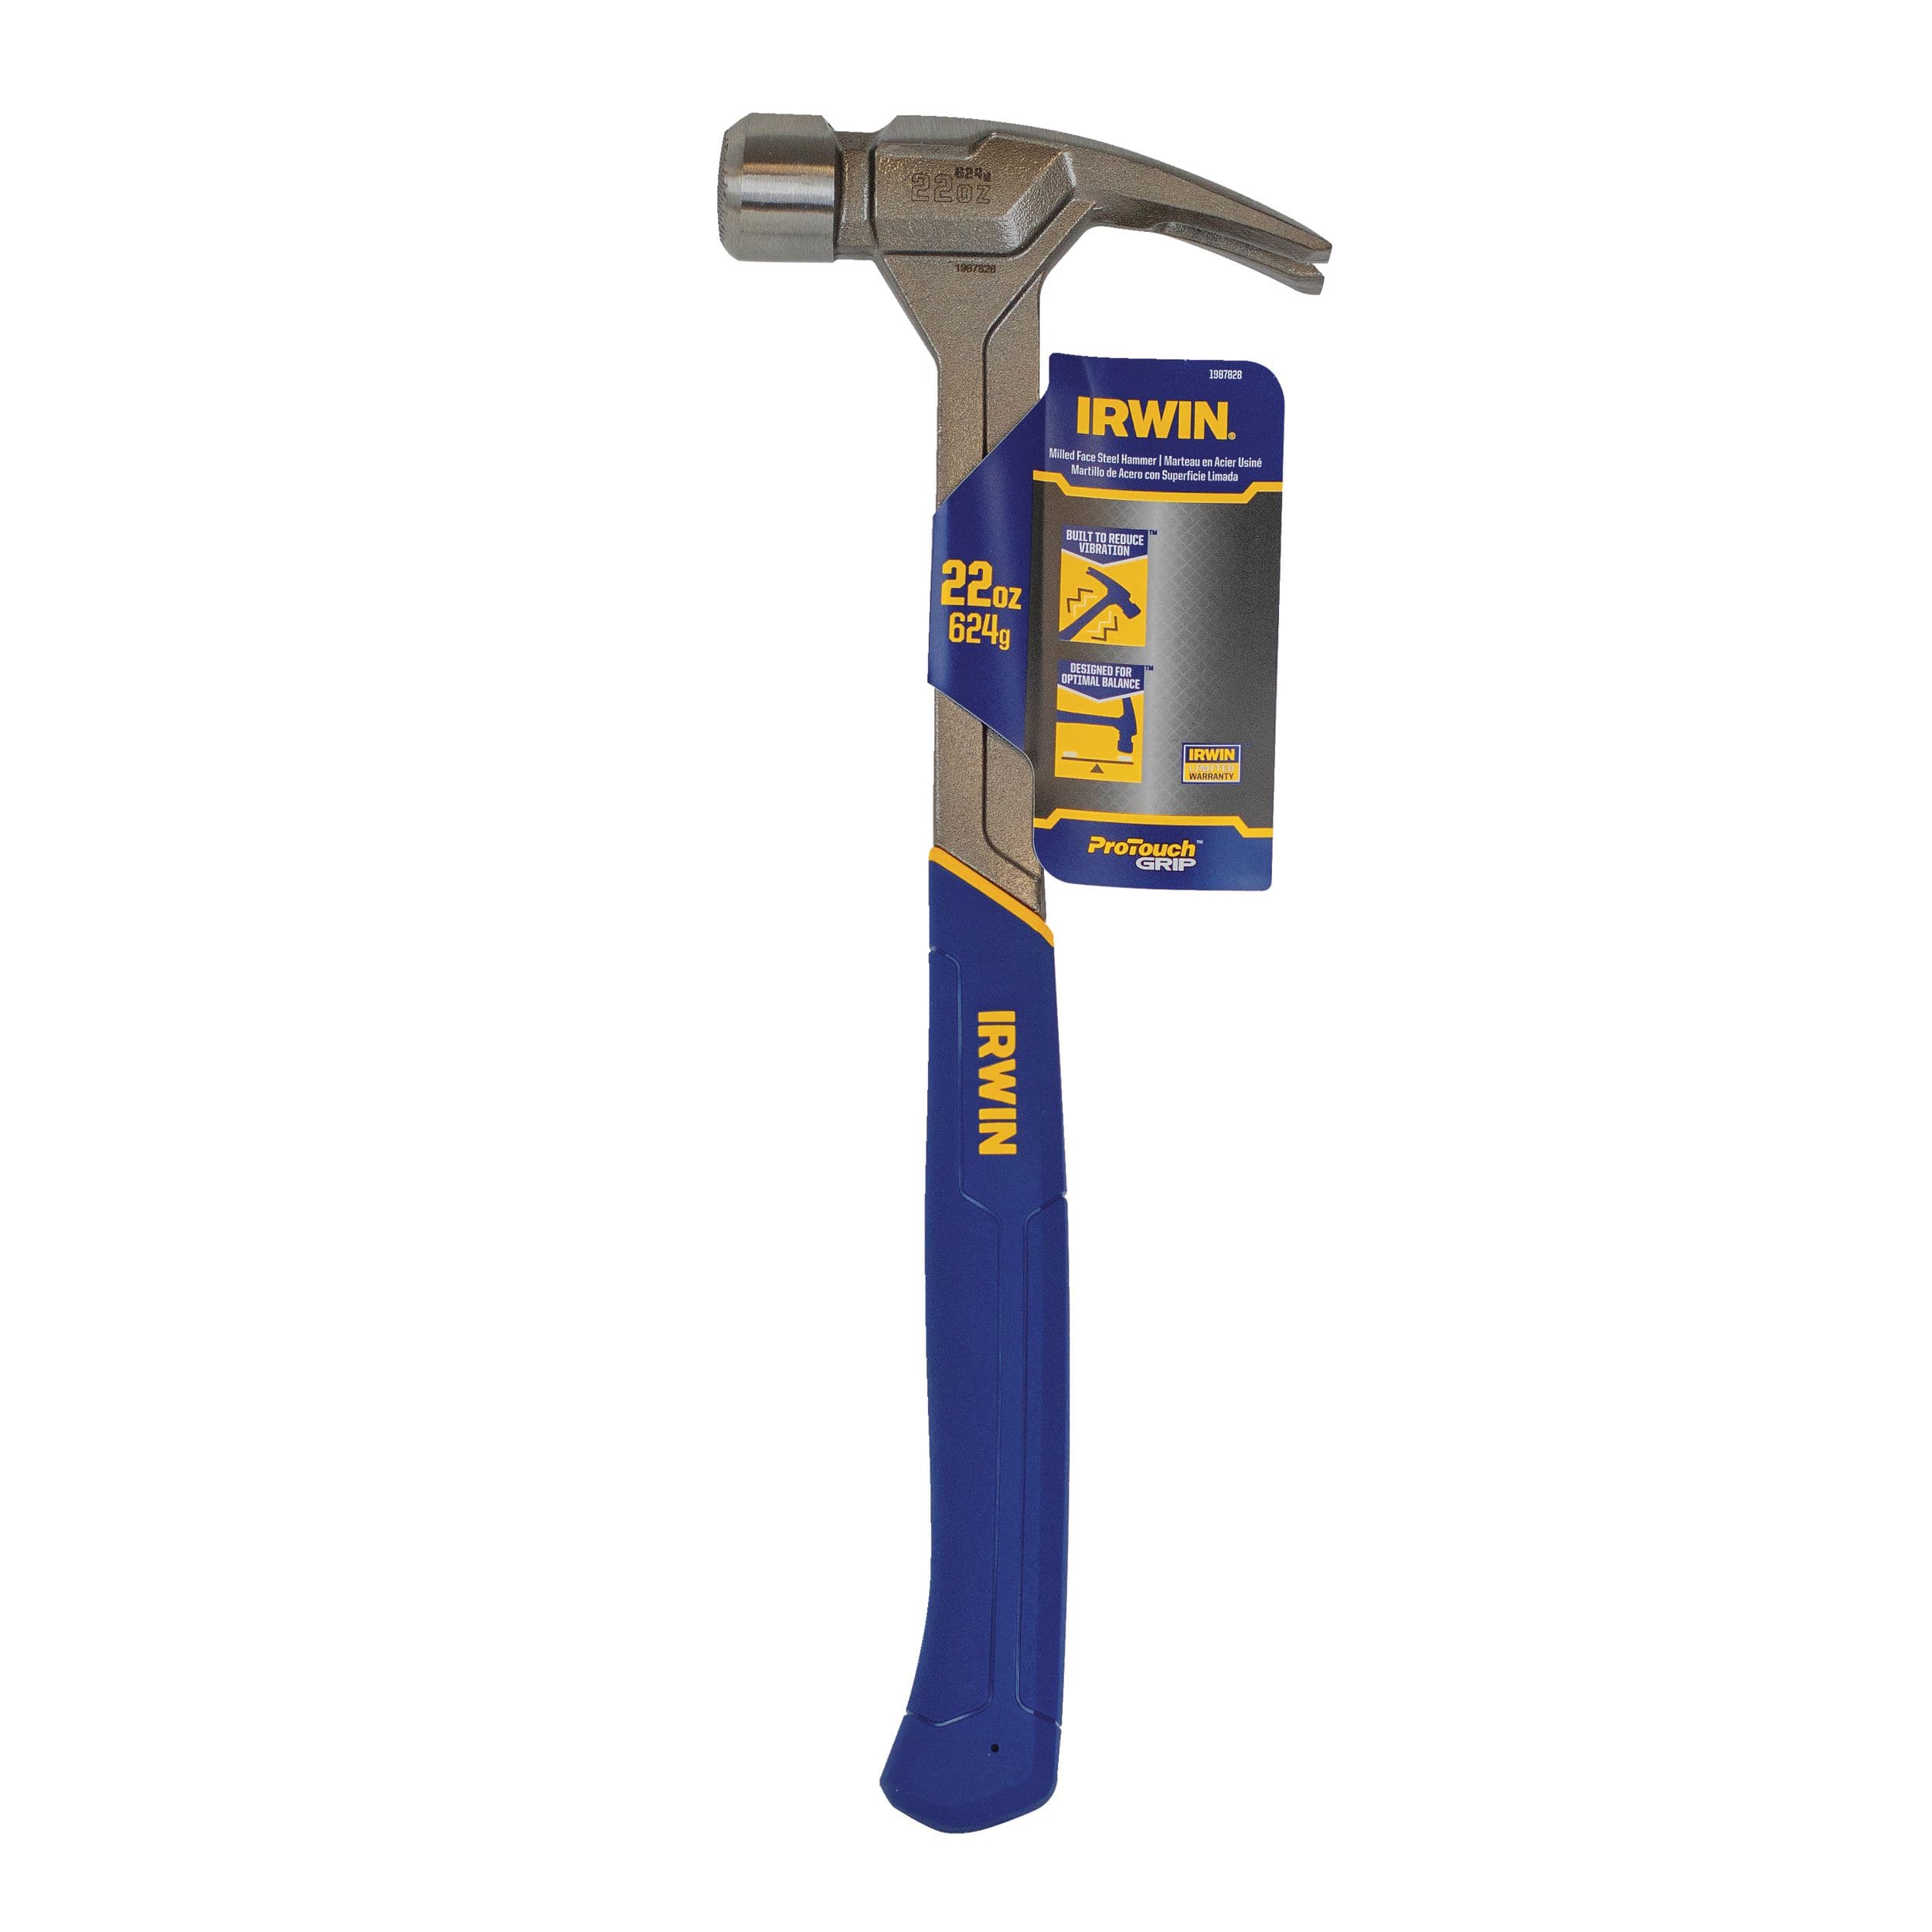 Irwin 22-oz Rip Claw hammer with One Piece Steel Construction